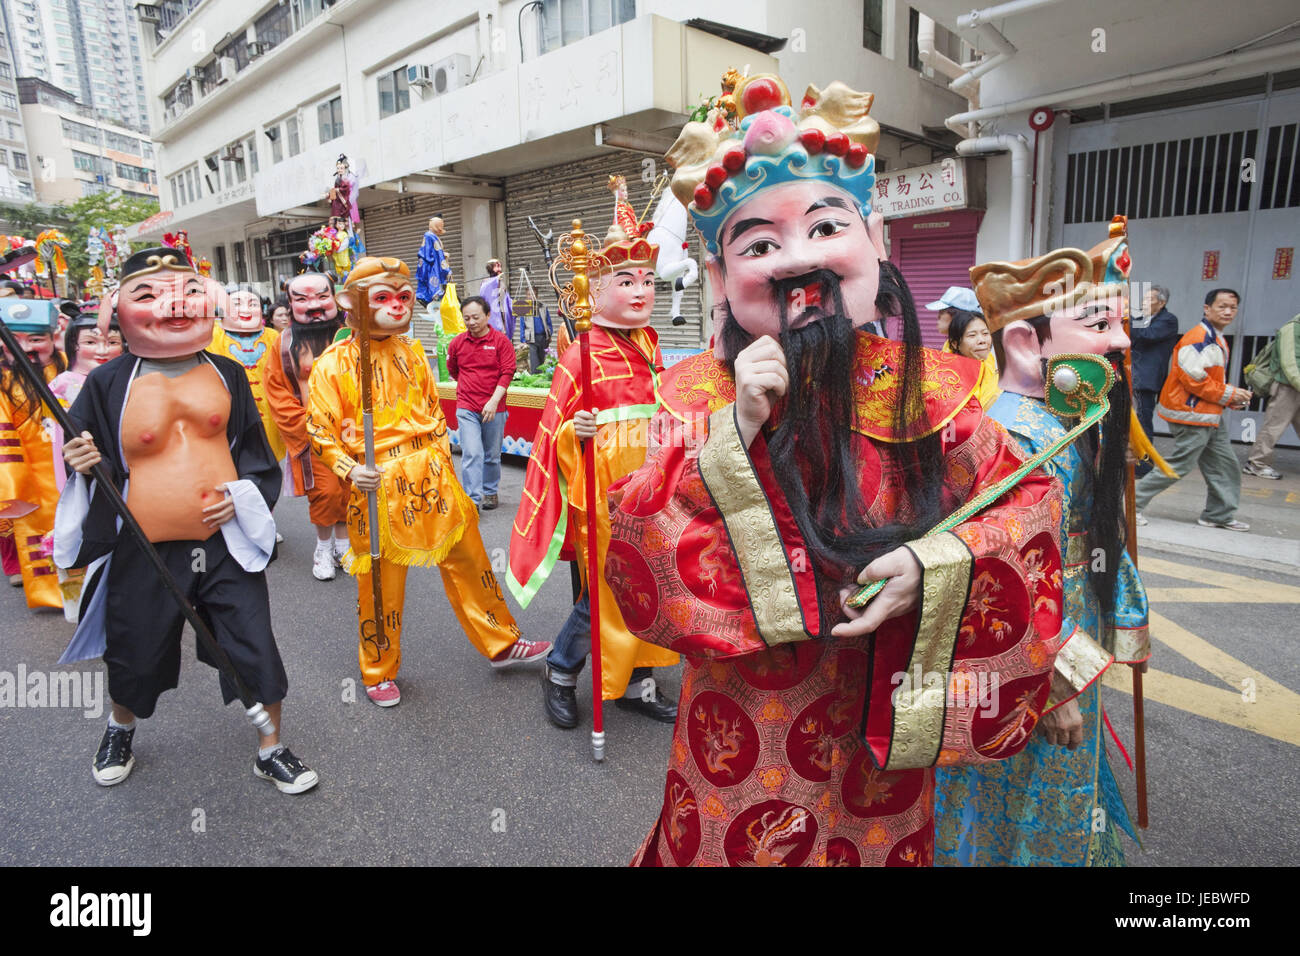 China, Hong Kong, street, save, doll, costume, tradition, festival, feast, culture, tourism, typically, crown, beard, person, masks, dresses up, Stock Photo